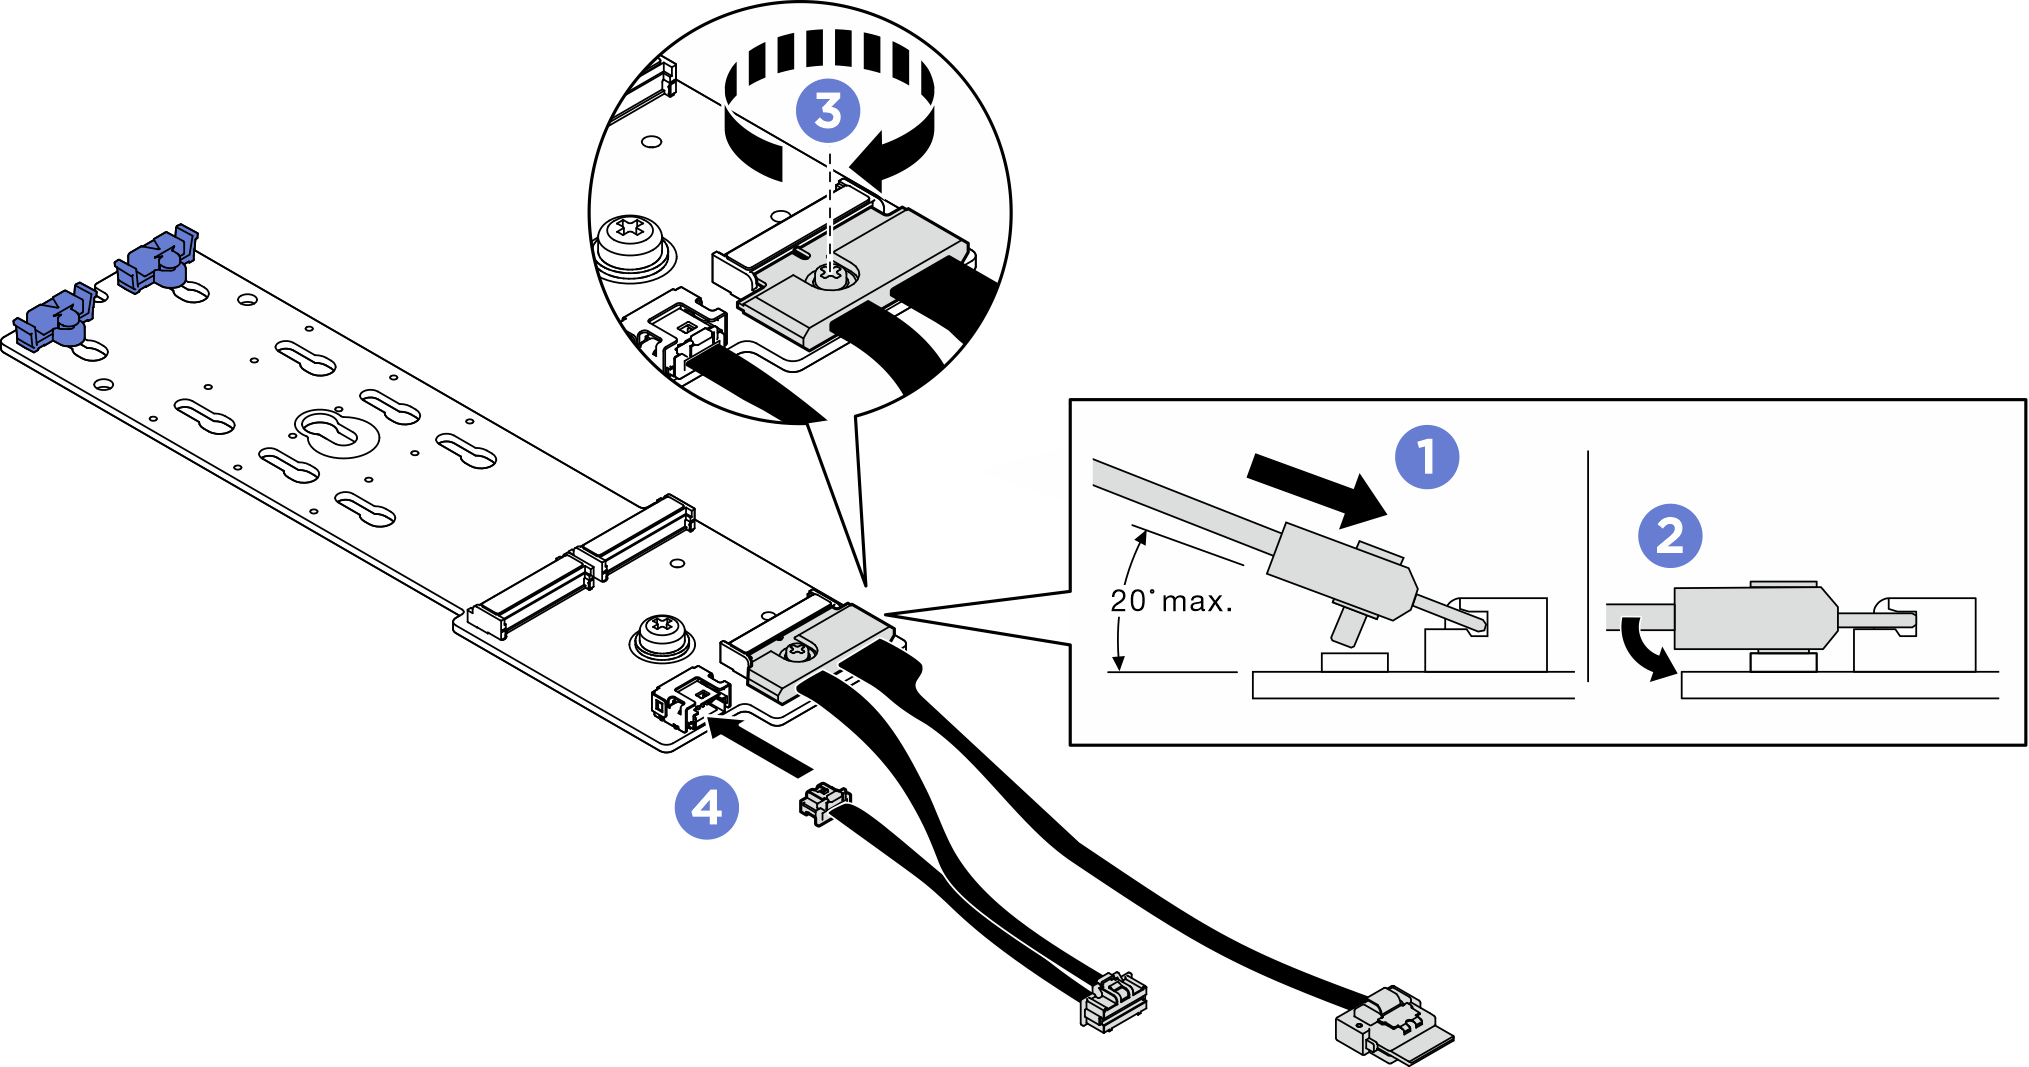 M.2 backplane cable connection